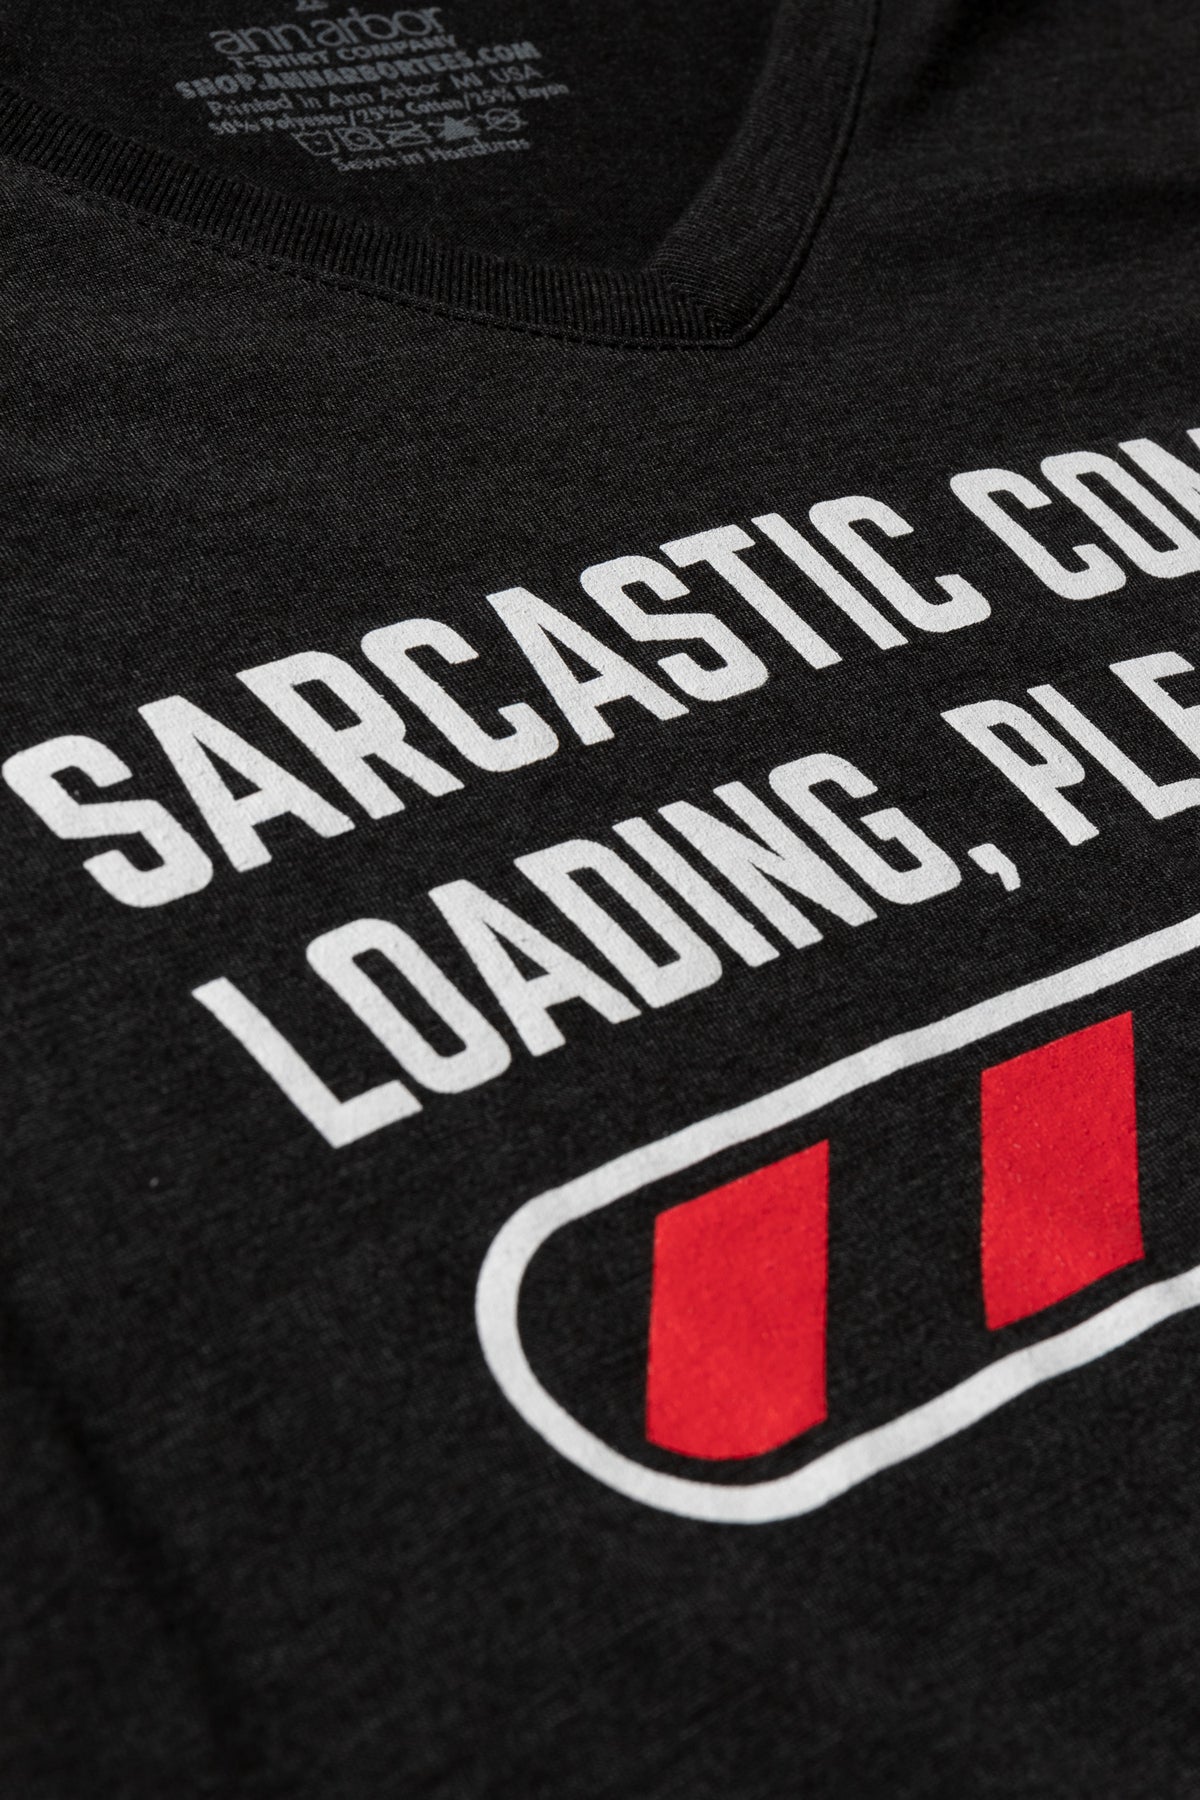 Sarcastic Comment Loading Please Wait Funny Sarcasm Humor for Women T-shirt Top